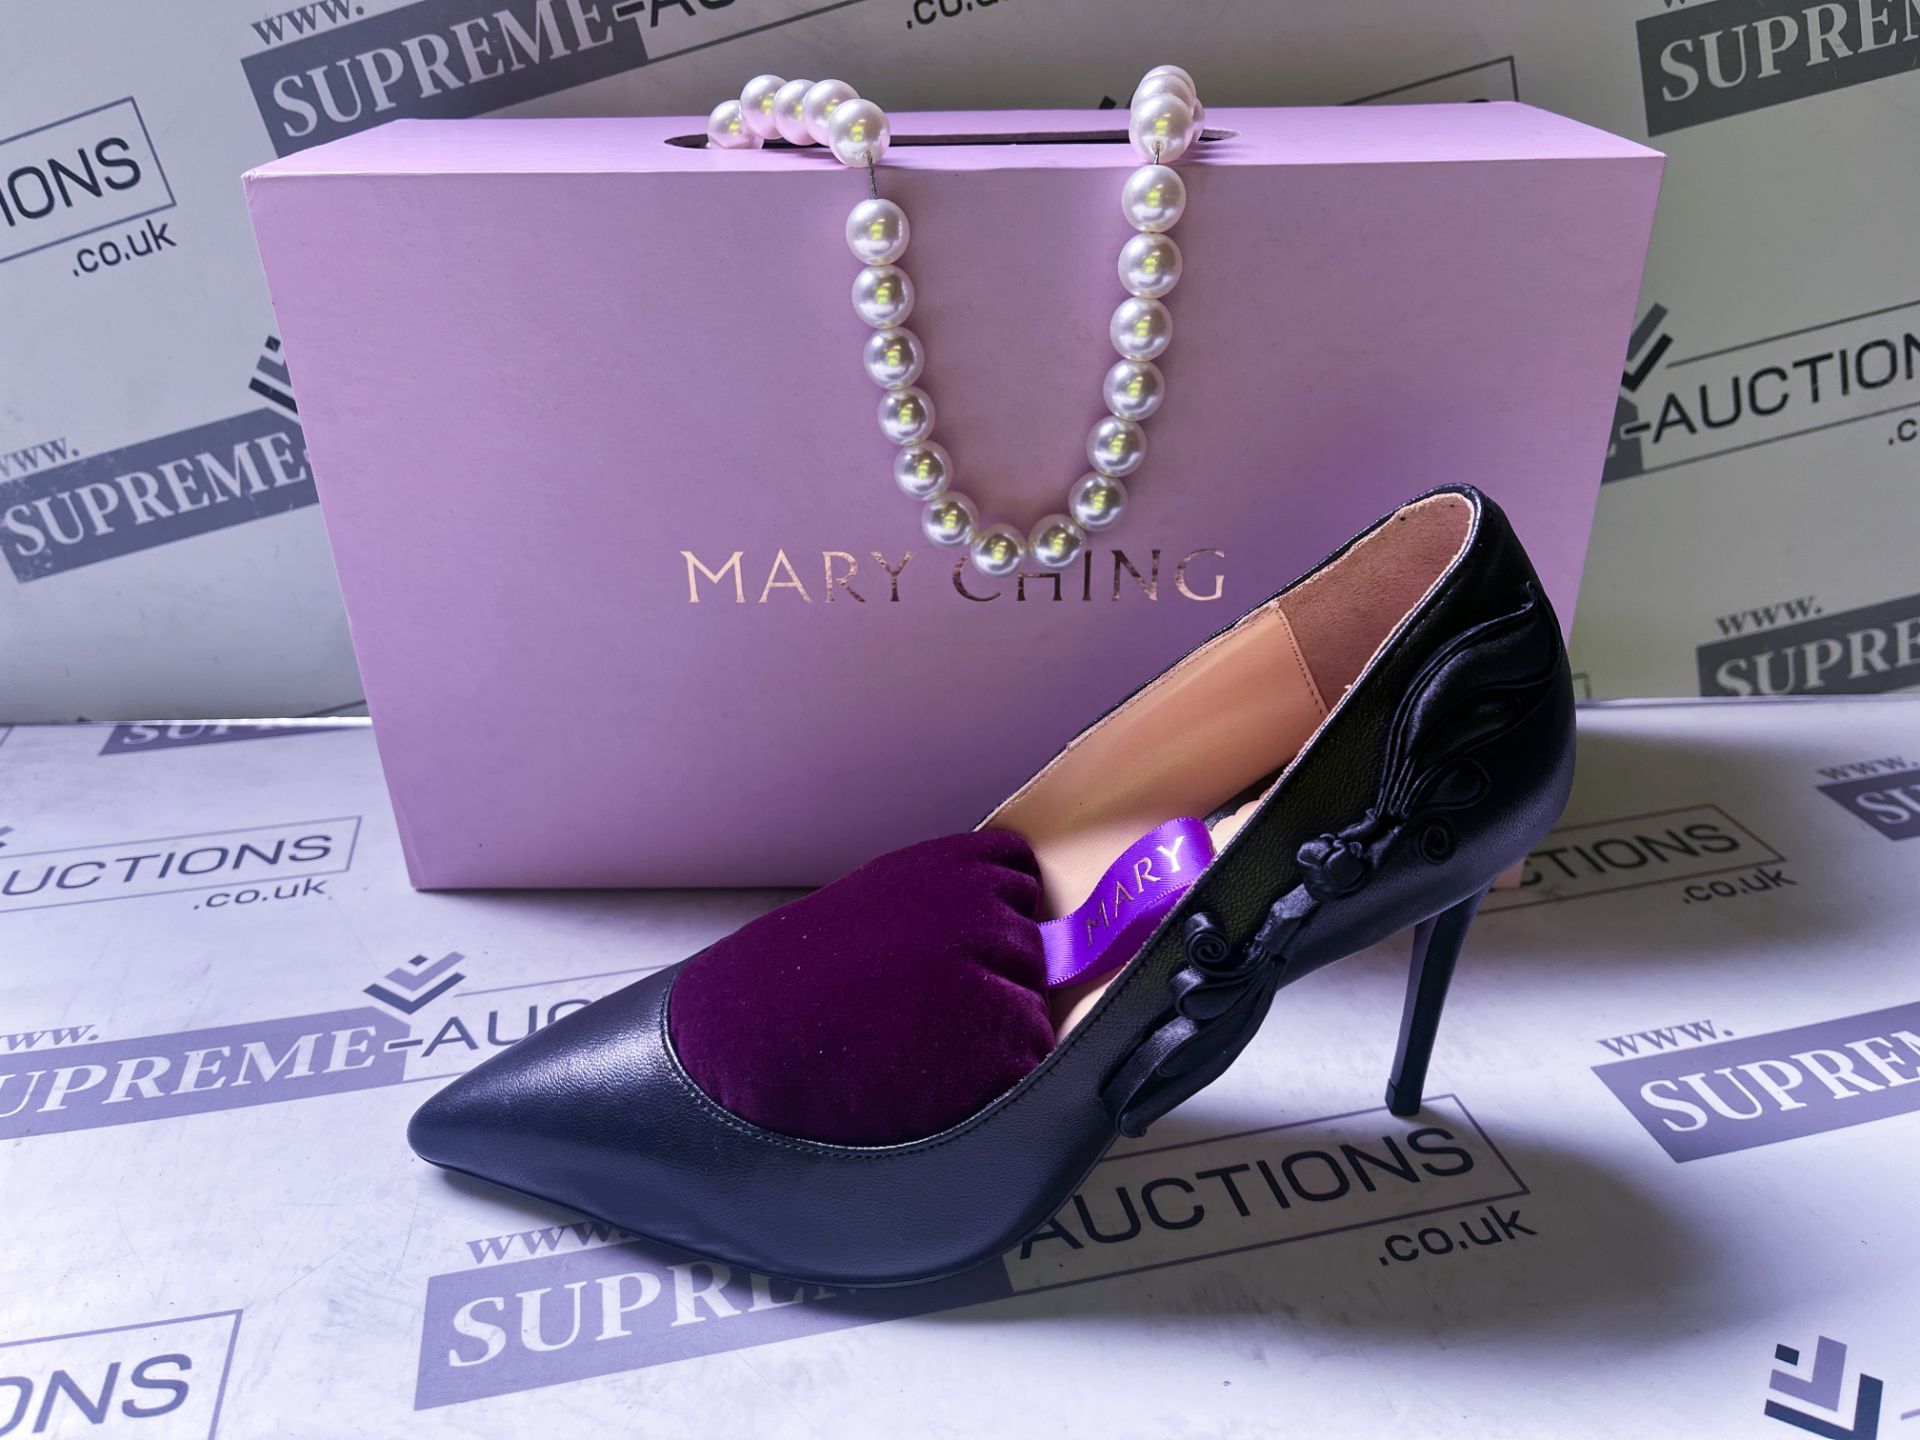 NEW & BOXED MARY CHING MC1006 100 Heel Ladies High End Fashion Shoes. BLACK NAPPA SIDE KNOT. SIZE